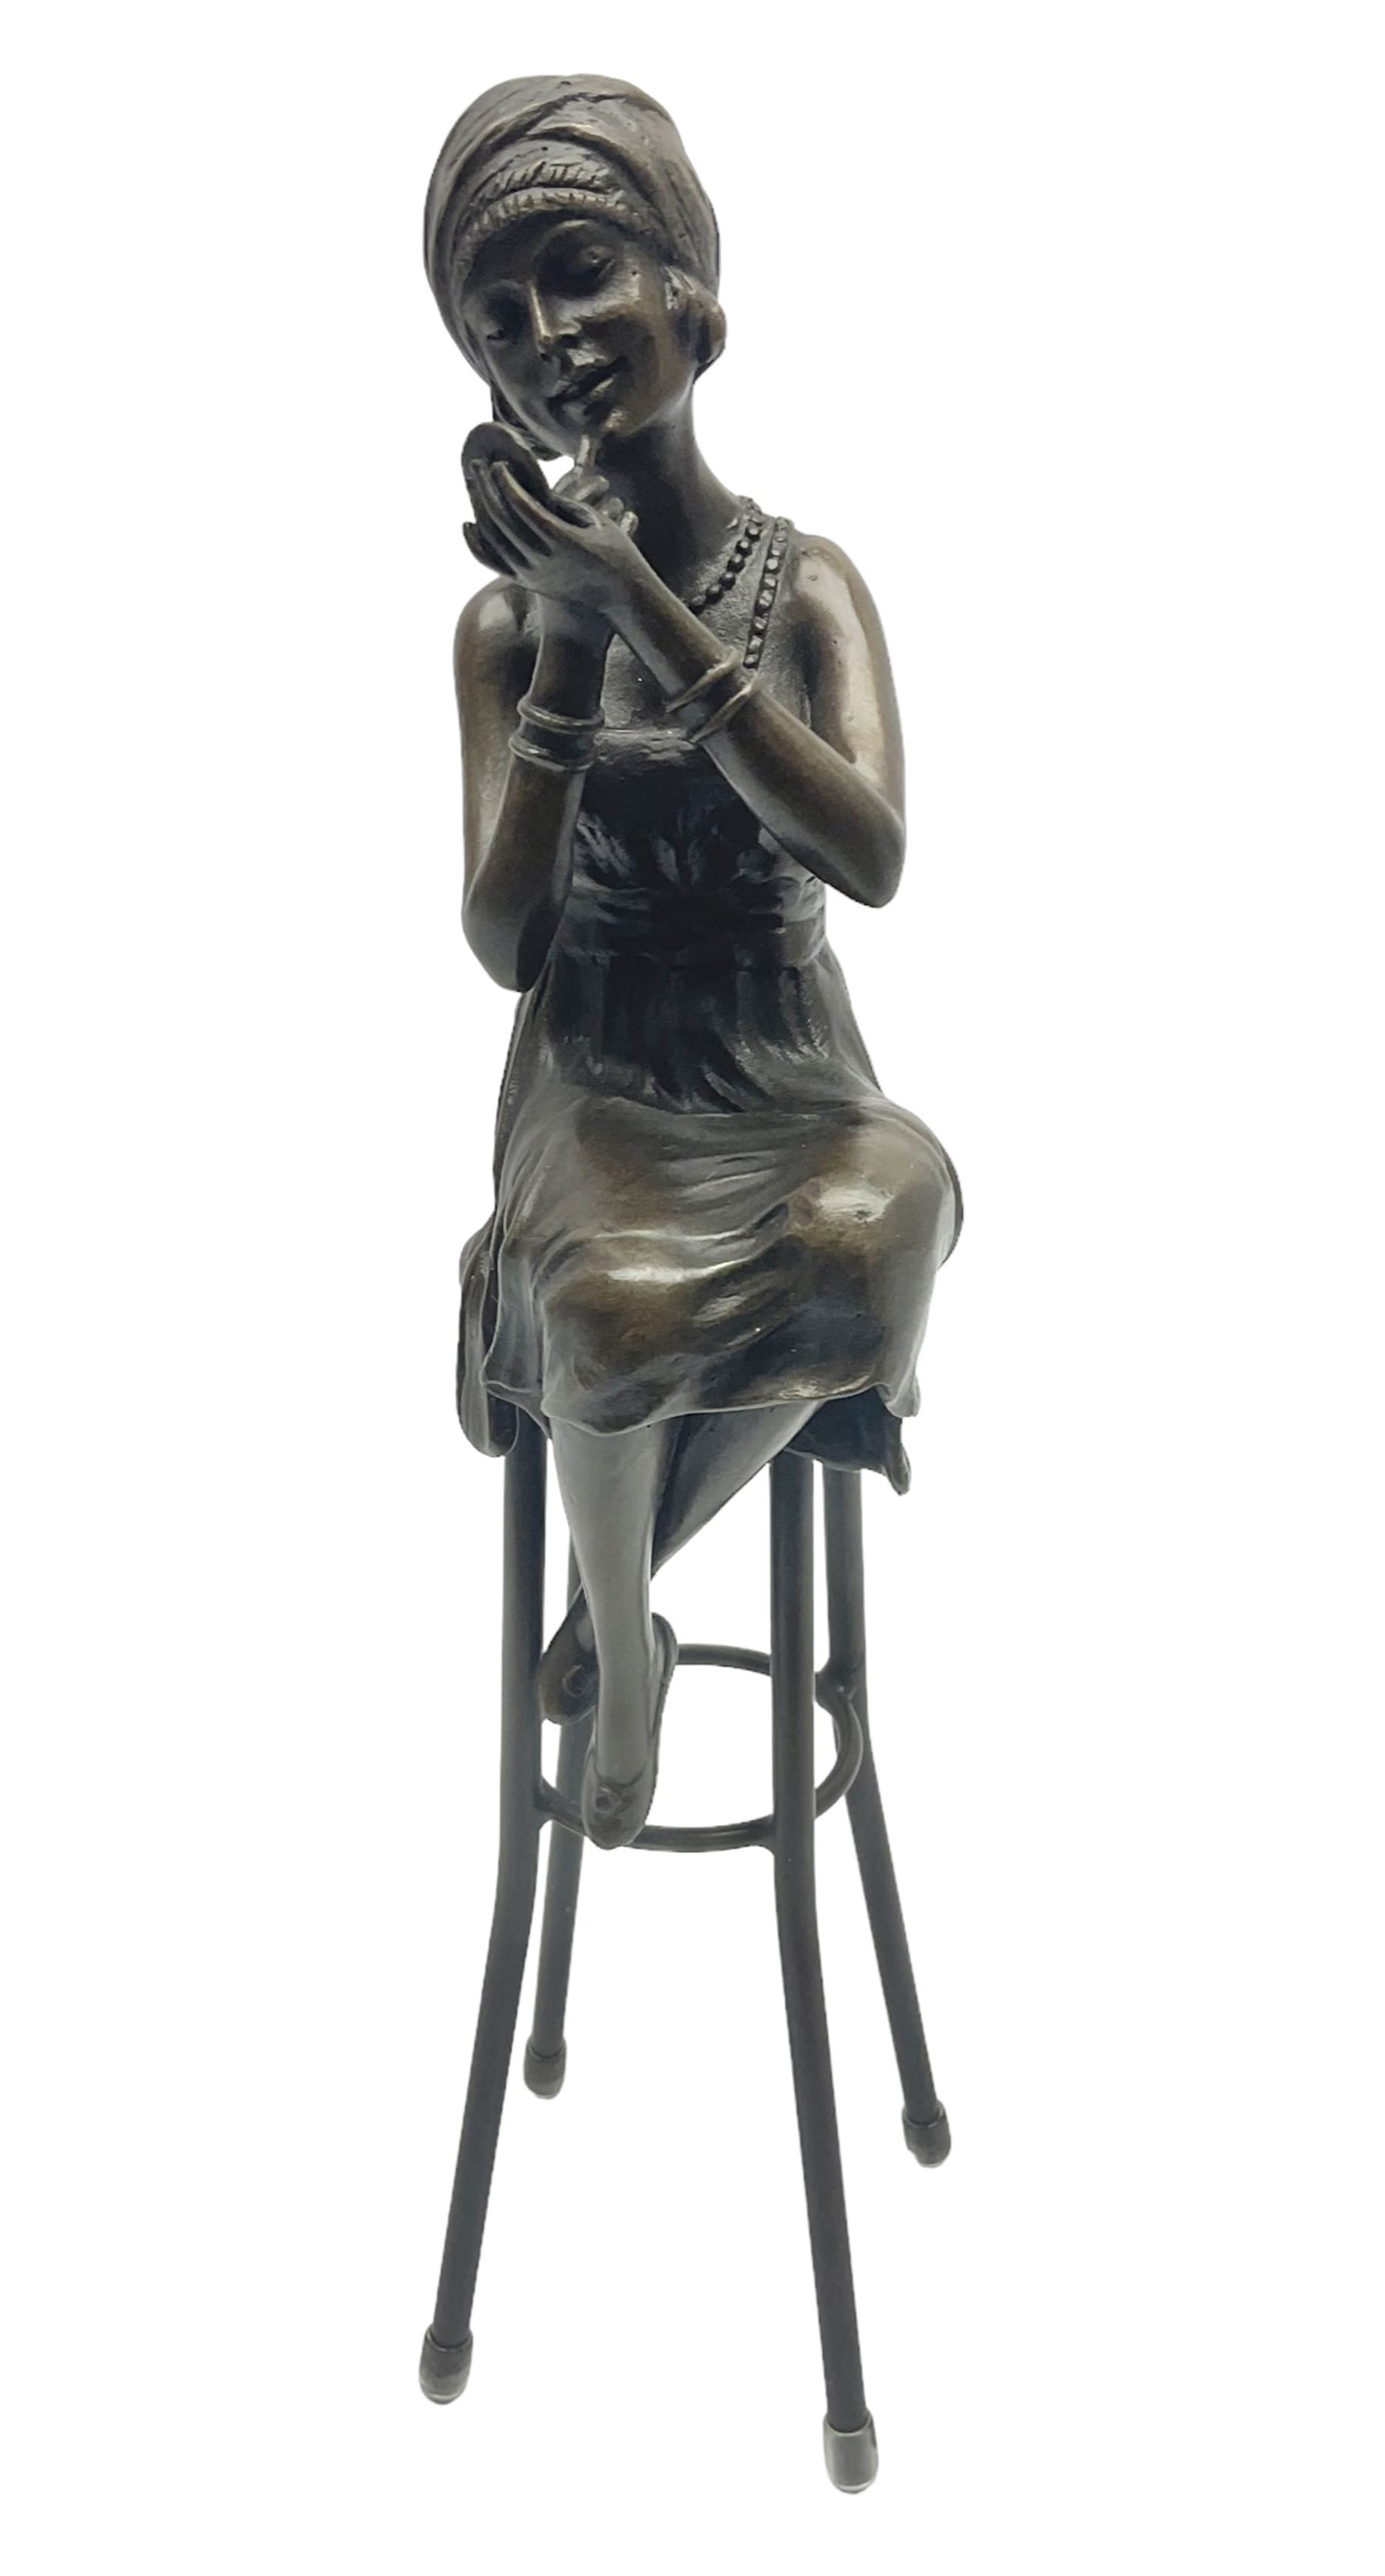 Art Deco style bronze figure of a lady seated on a stool applying lipstick